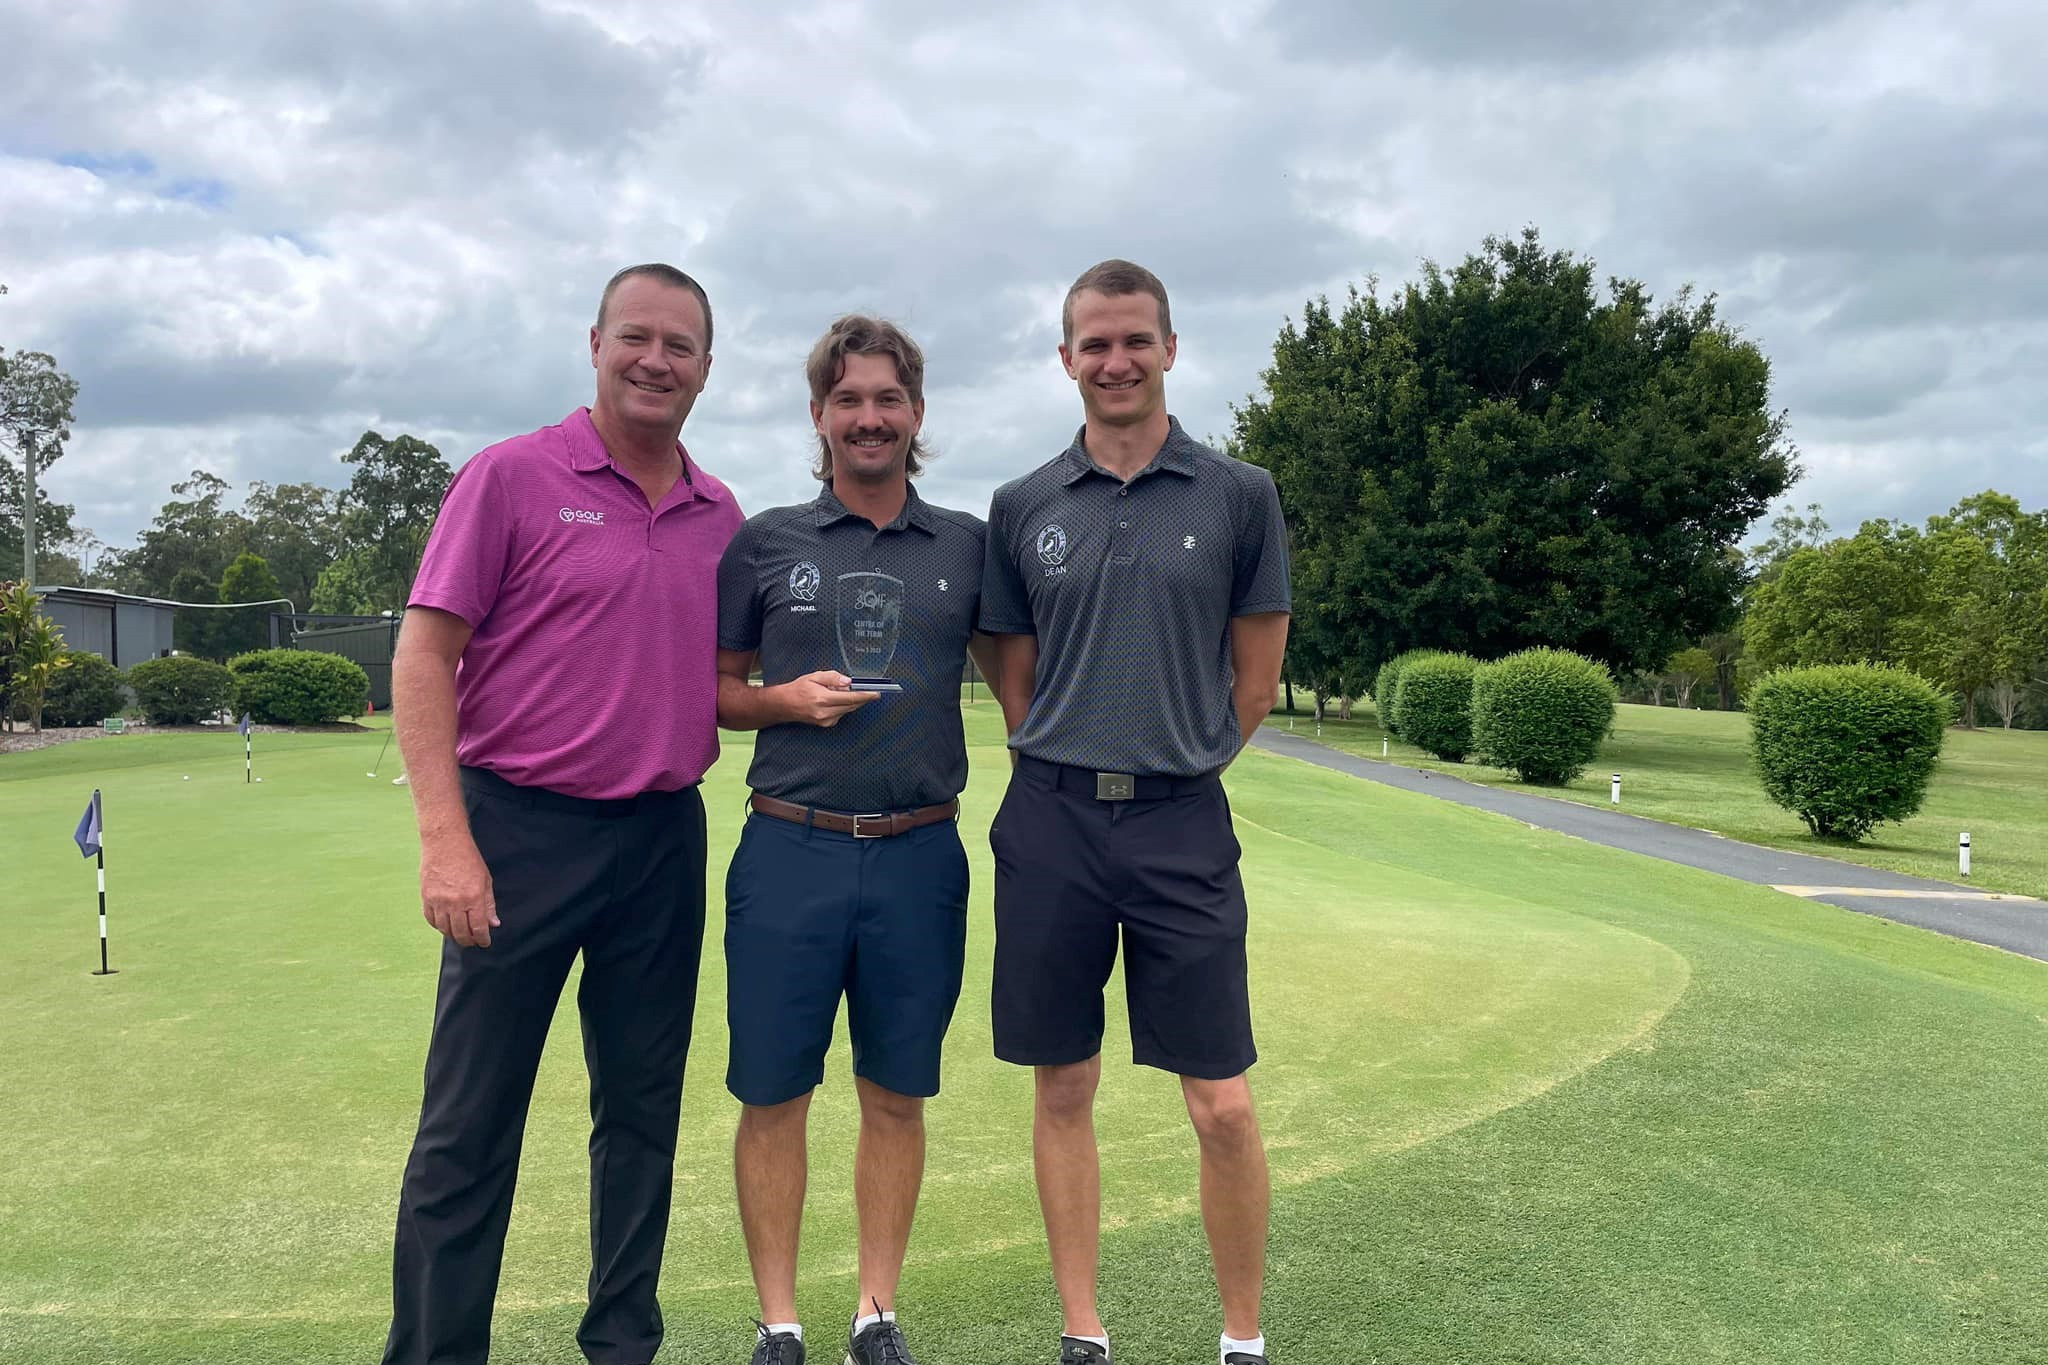 Golf participation manager Scott Simons presents the My Golf Centre Term 3 award to Michael Brodie and Dean Dagan of Woodford Golf Club.